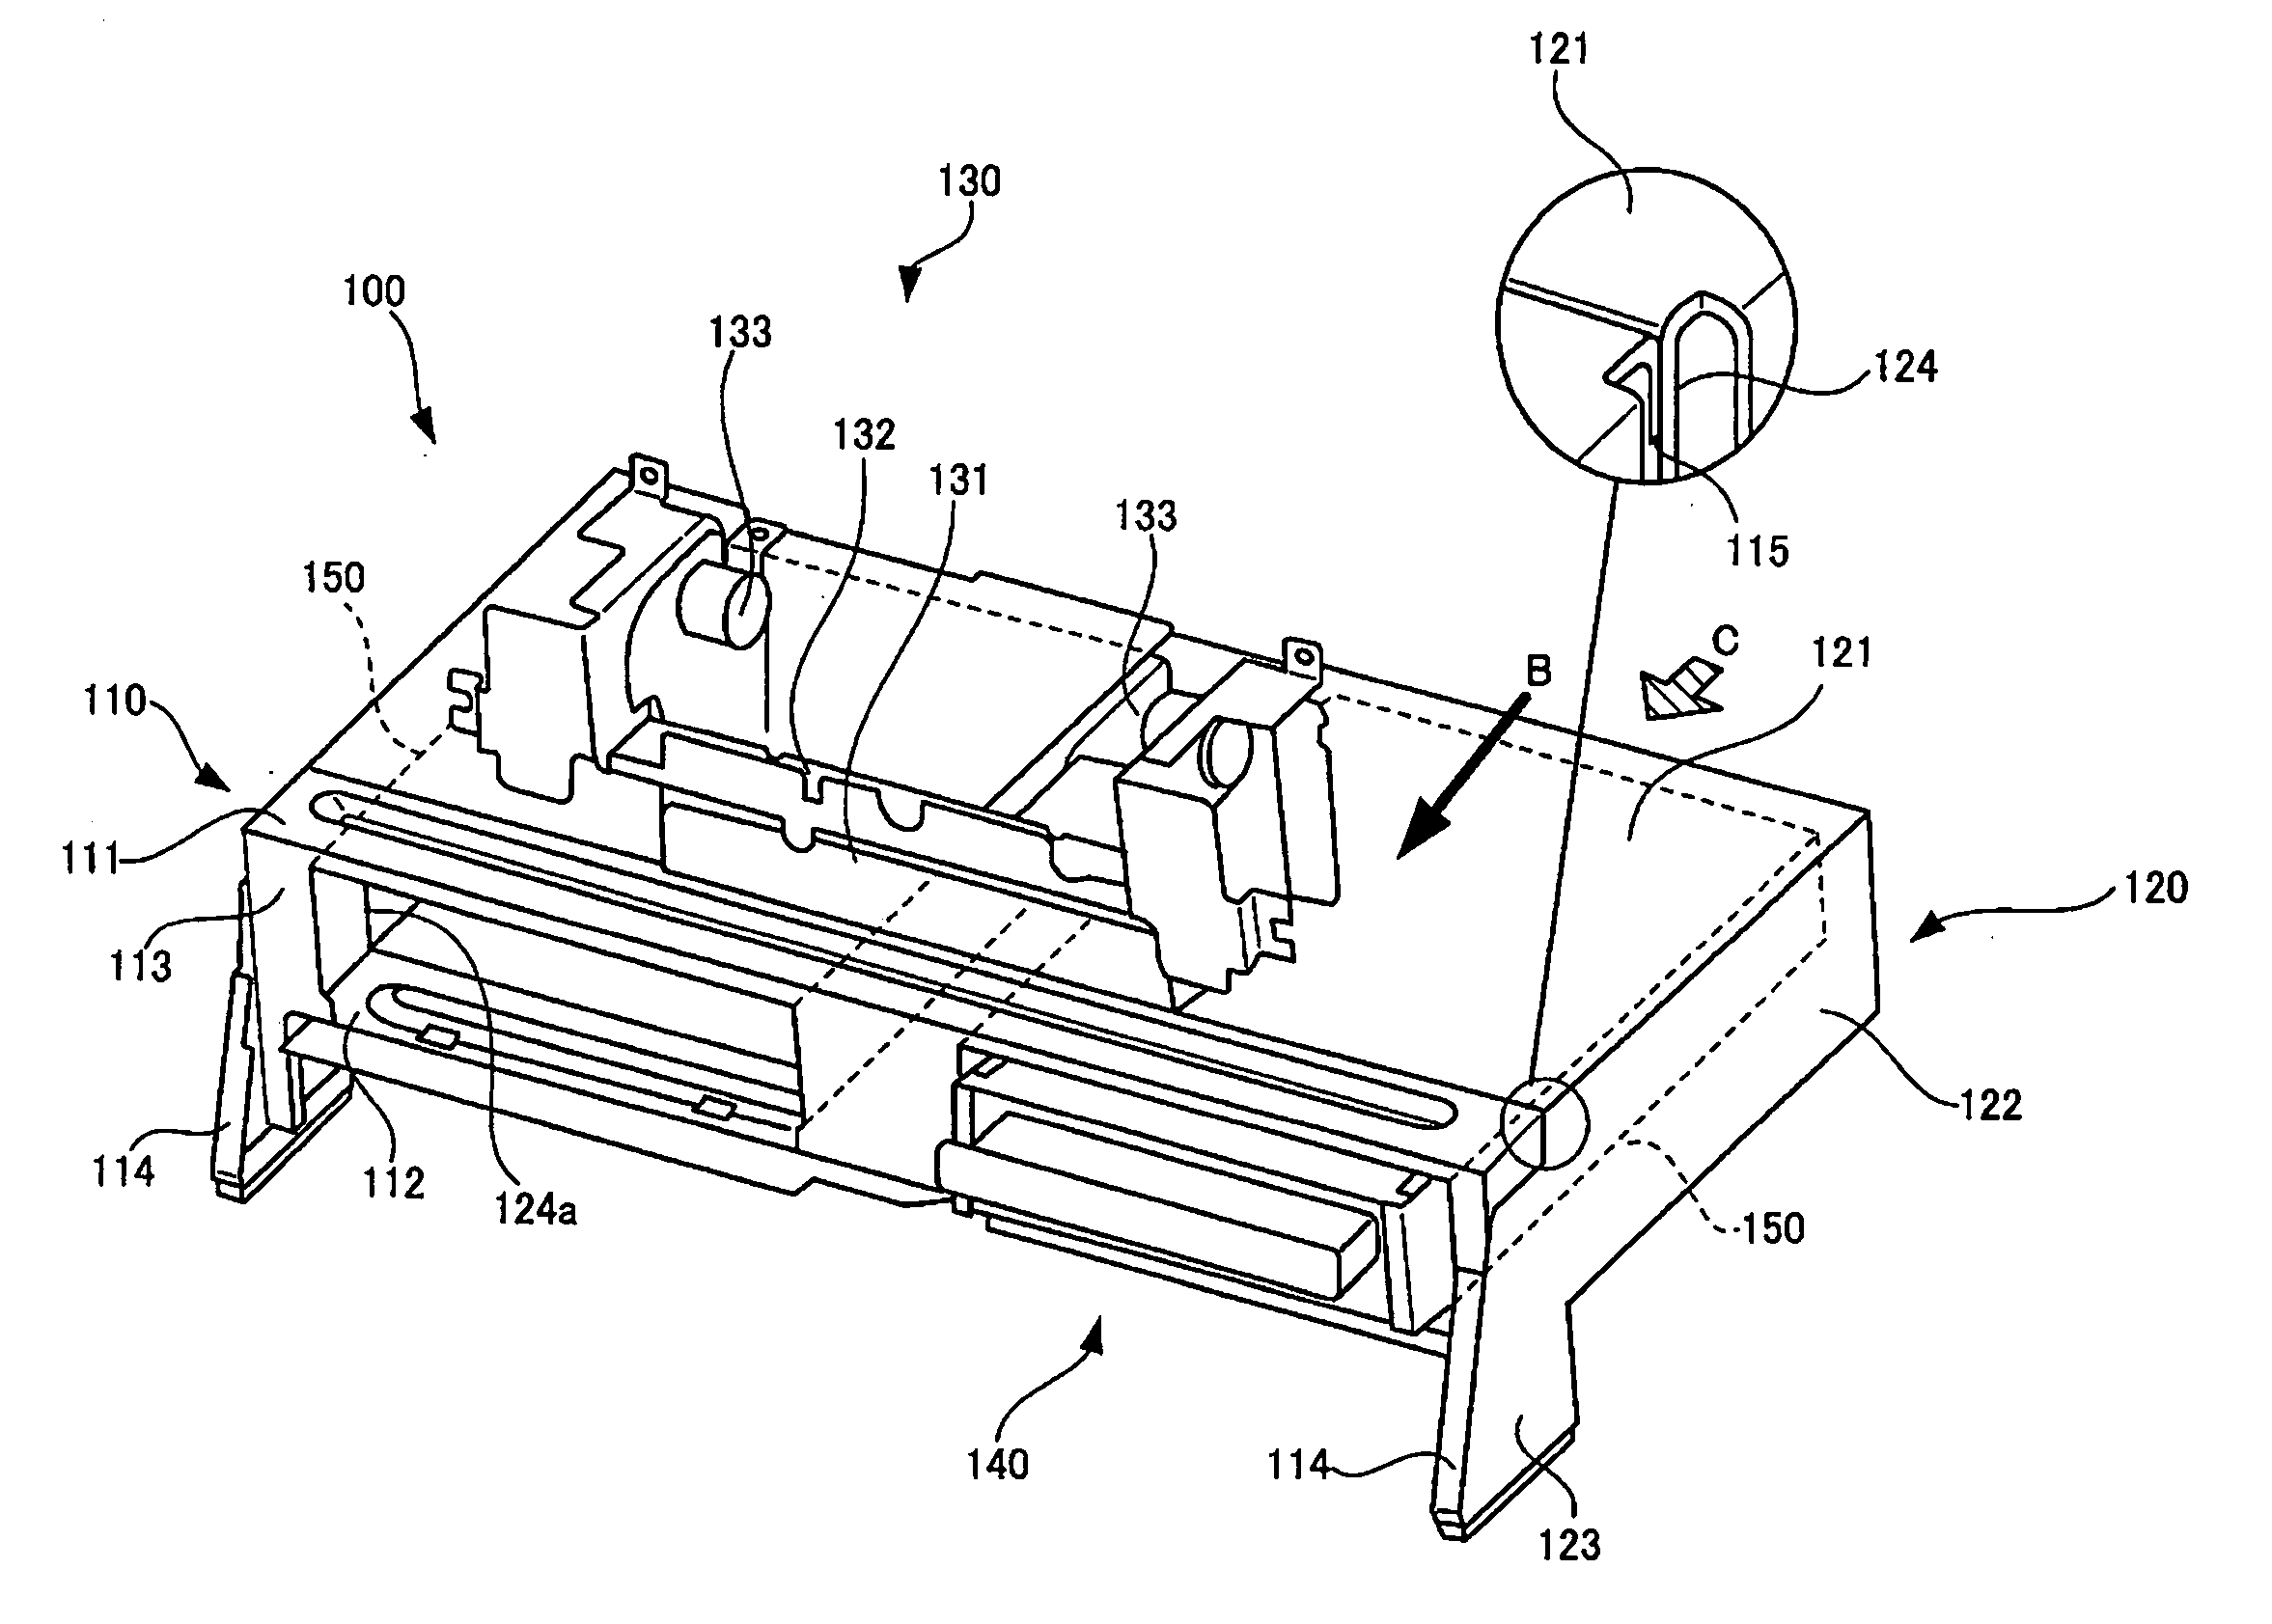 Casing structure and electronic device